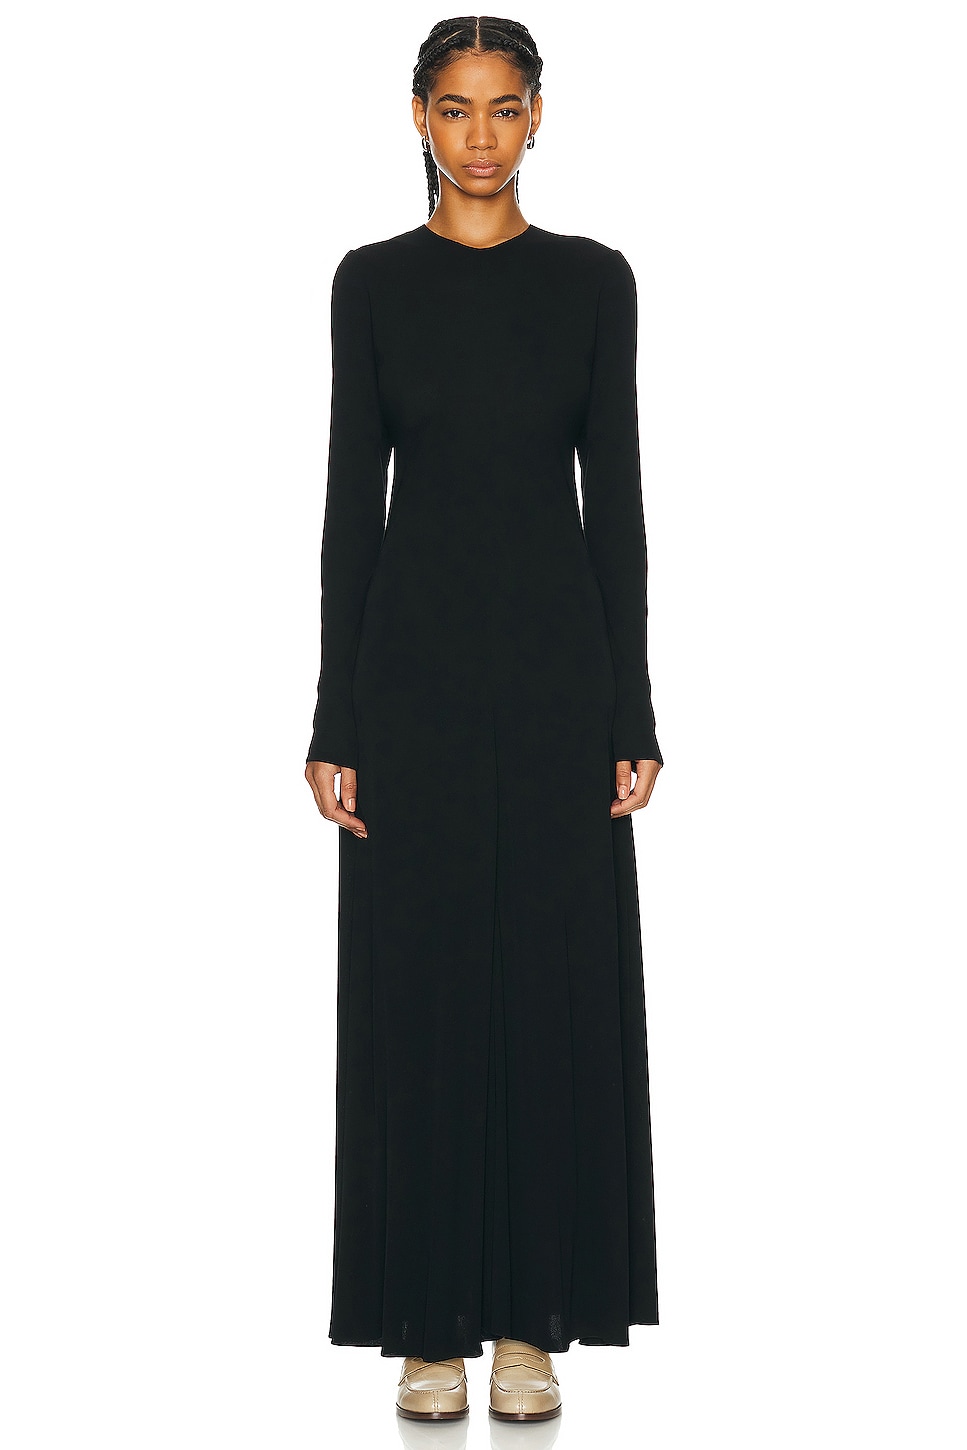 Image 1 of The Row Venusia Dress in BLACK